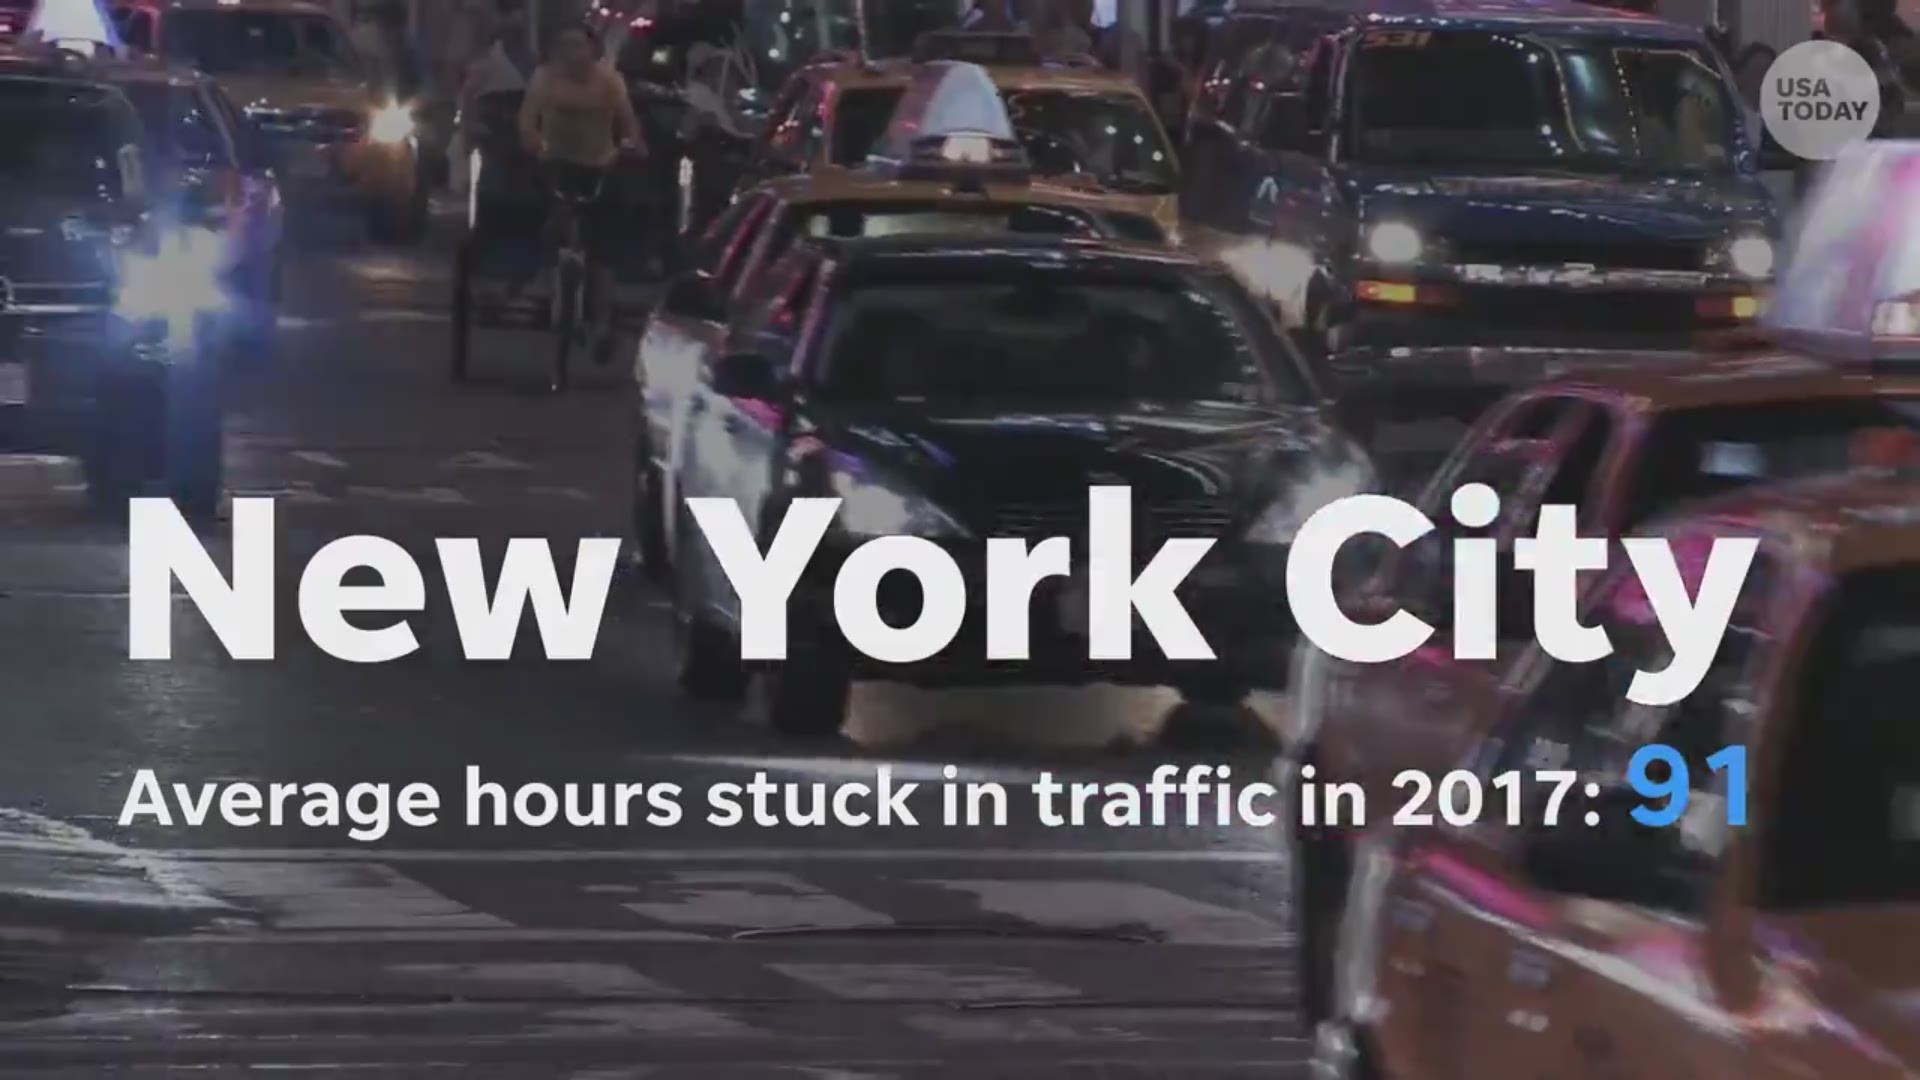 If you think your commute is bad, these cities have it way worse with some of the worst traffic in the world. (USA Today)